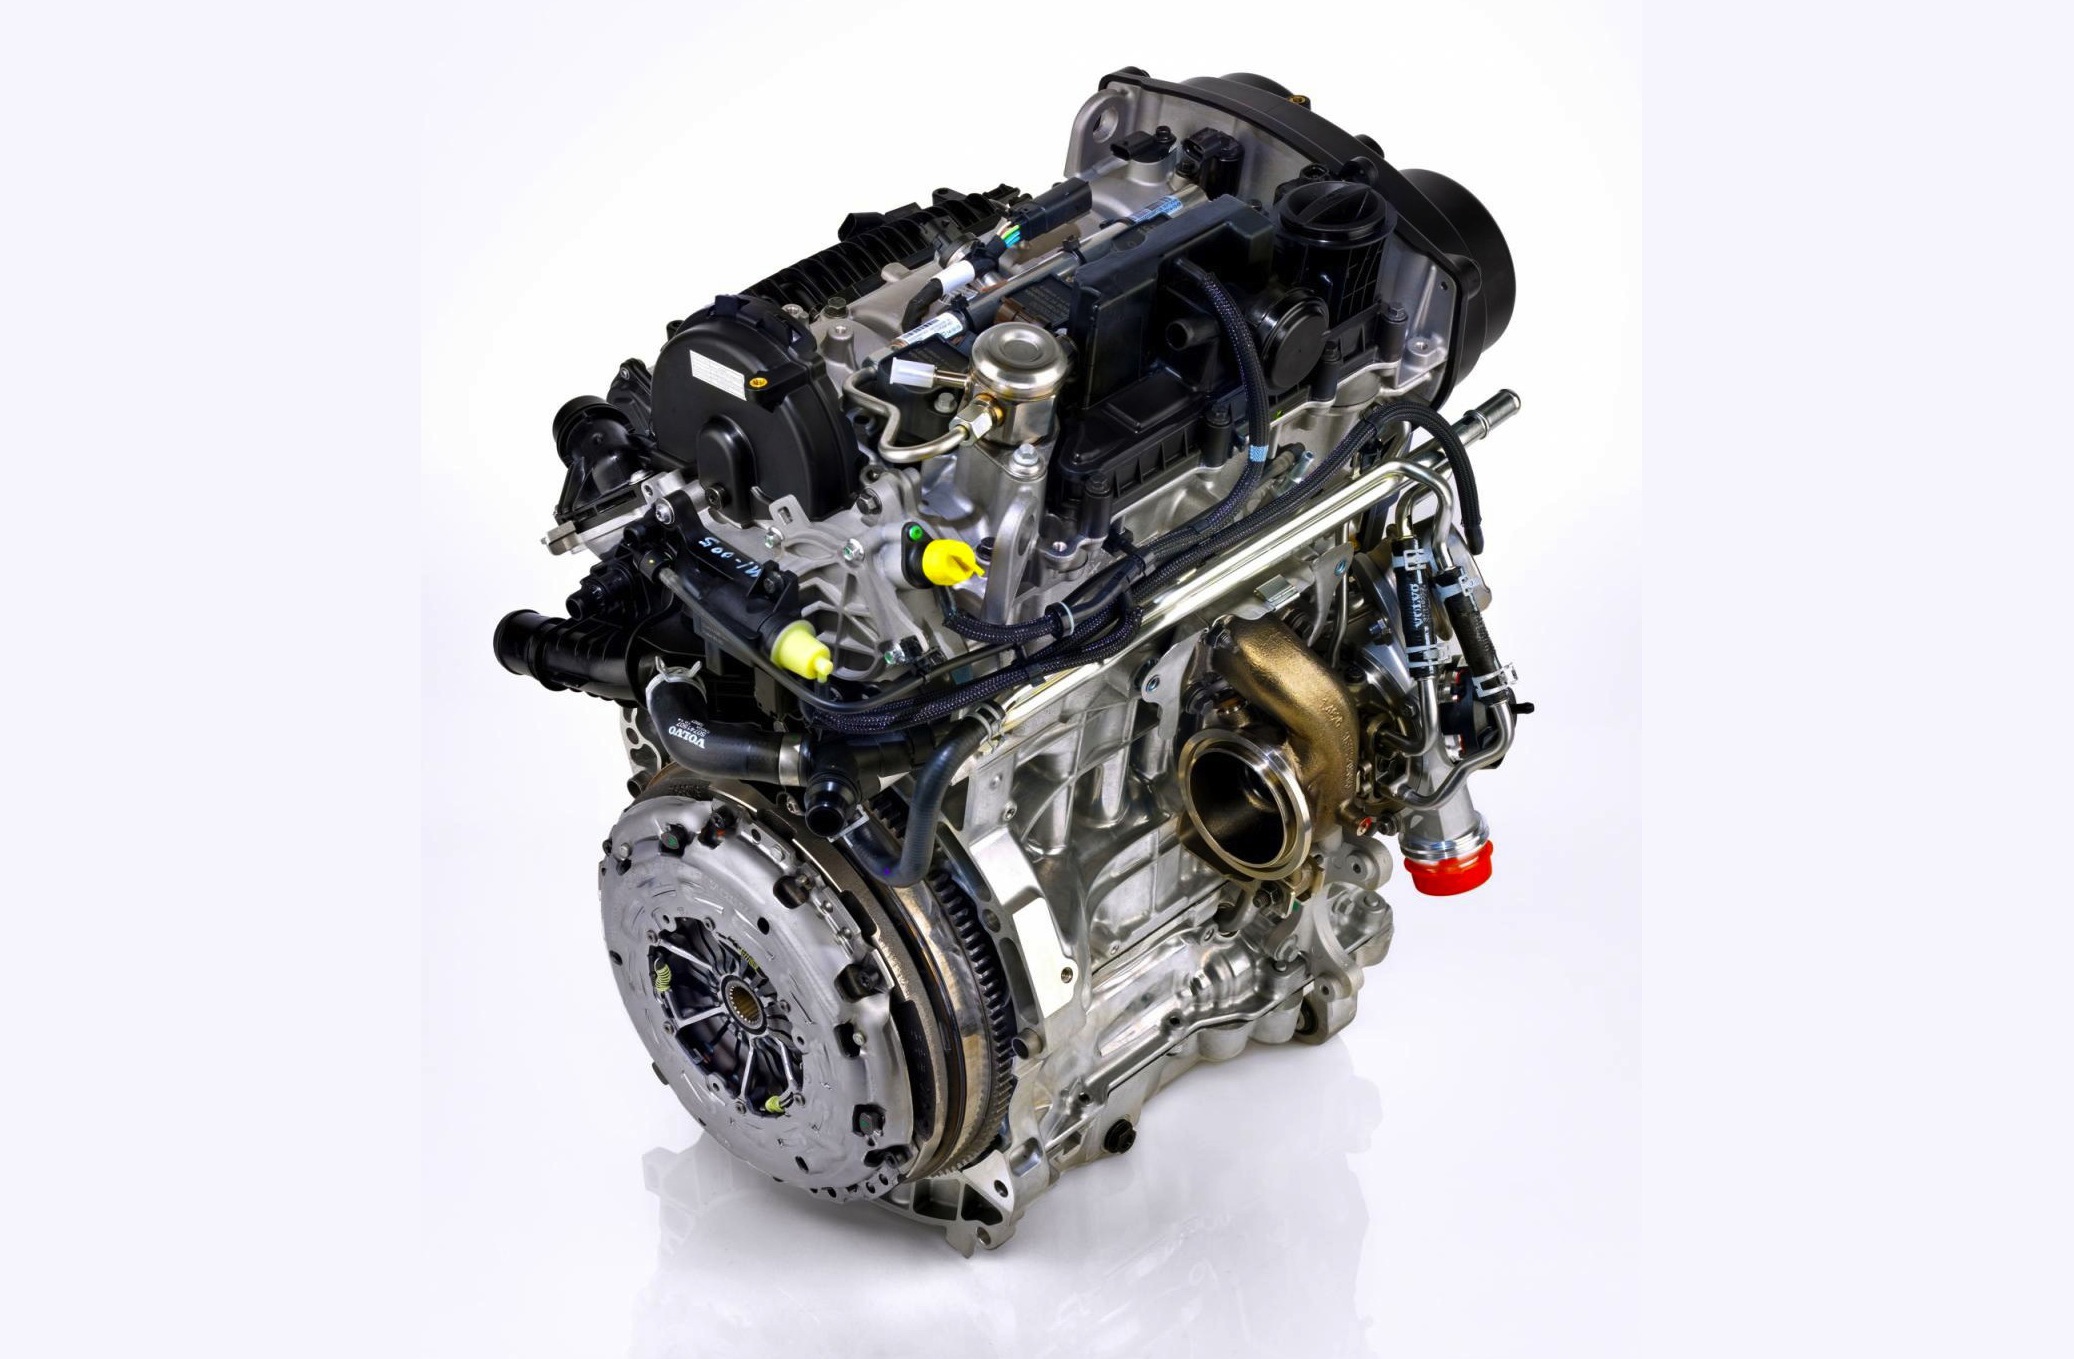 Volvo expands Drive-E engine family with new 3-cylinder